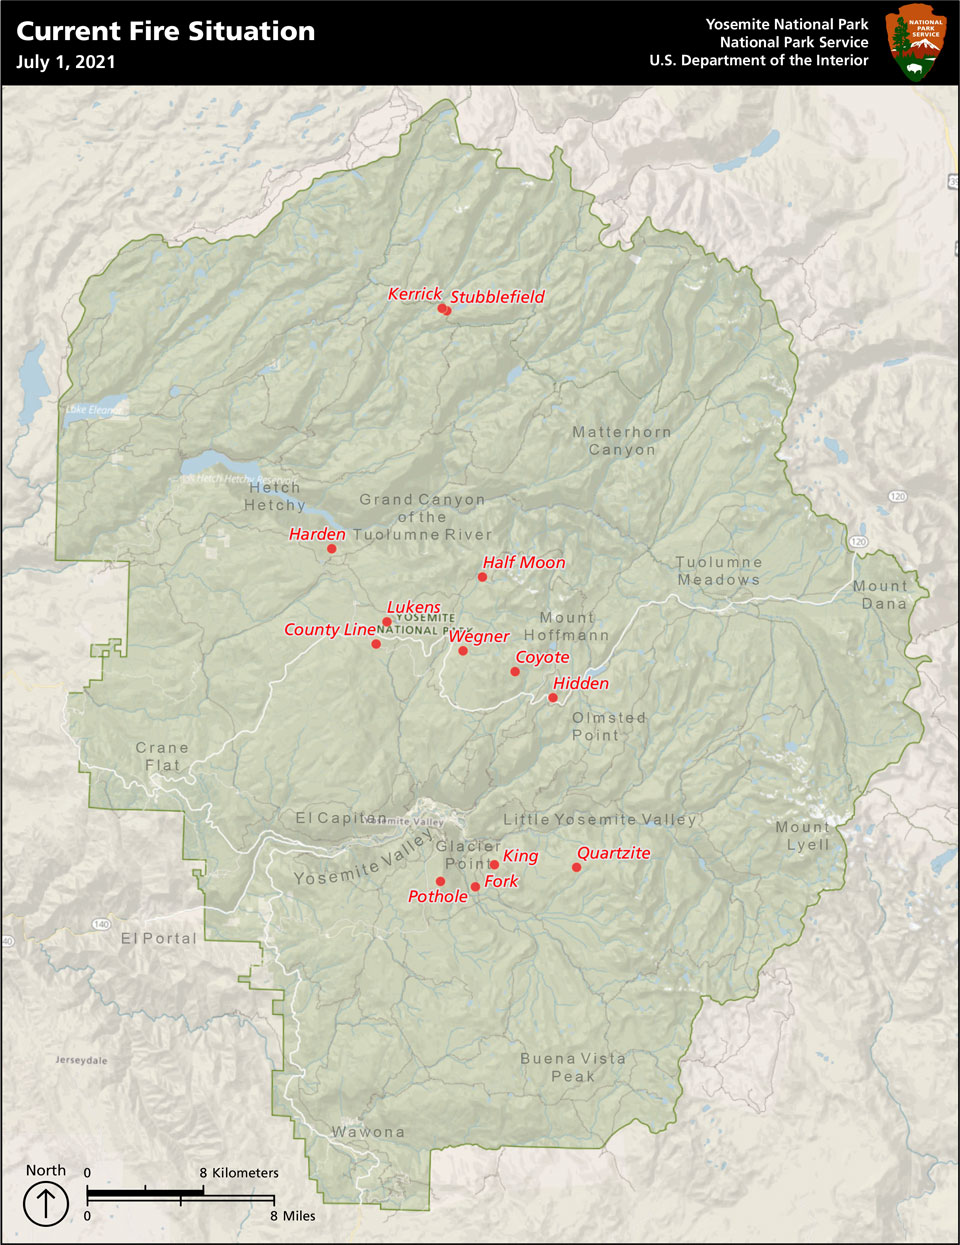 Map of Yosemite National Park showing fires scattered throughout the park